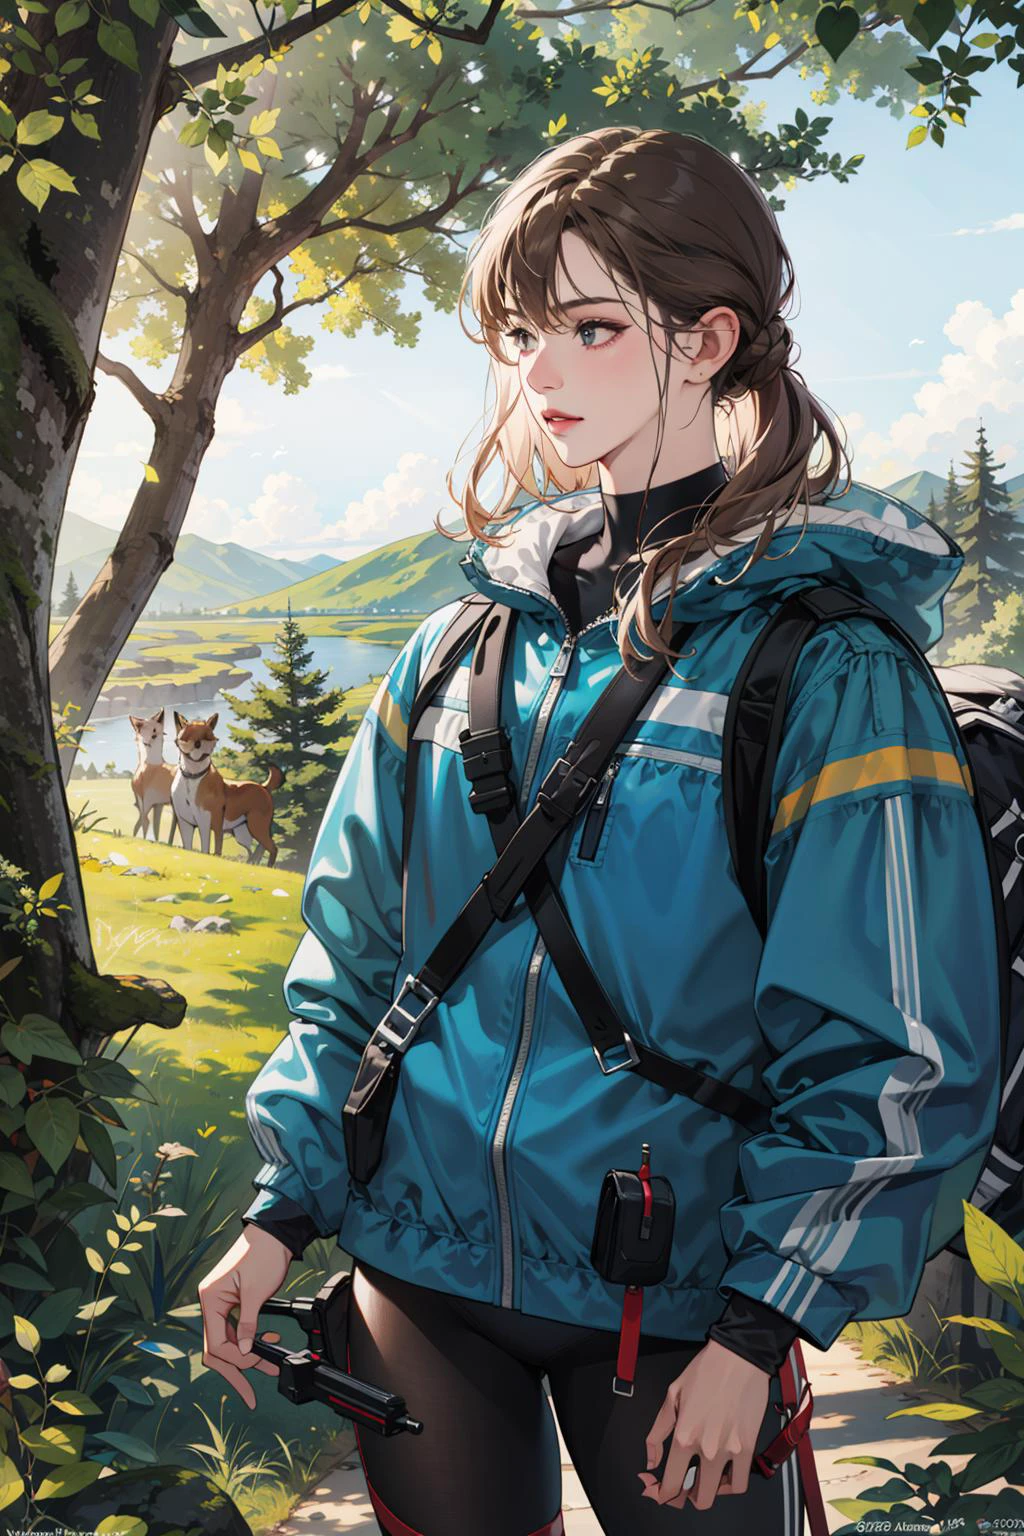 (absurdres, highres, ultra detailed), (1girl:1.4, cowboy shot), BREAK hyperrealism, photorealistic detail, incredible accuracy, lifelike textures, masterful technique, jaw-dropping precision, artistic dedication BREAK merged visuals, evocative storytelling, dreamlike atmosphere, creative blending, thought-provoking composition BREAK , hiking, camping, cycling, nature walks, outdoor exploration, physical challenges, connecting with nature